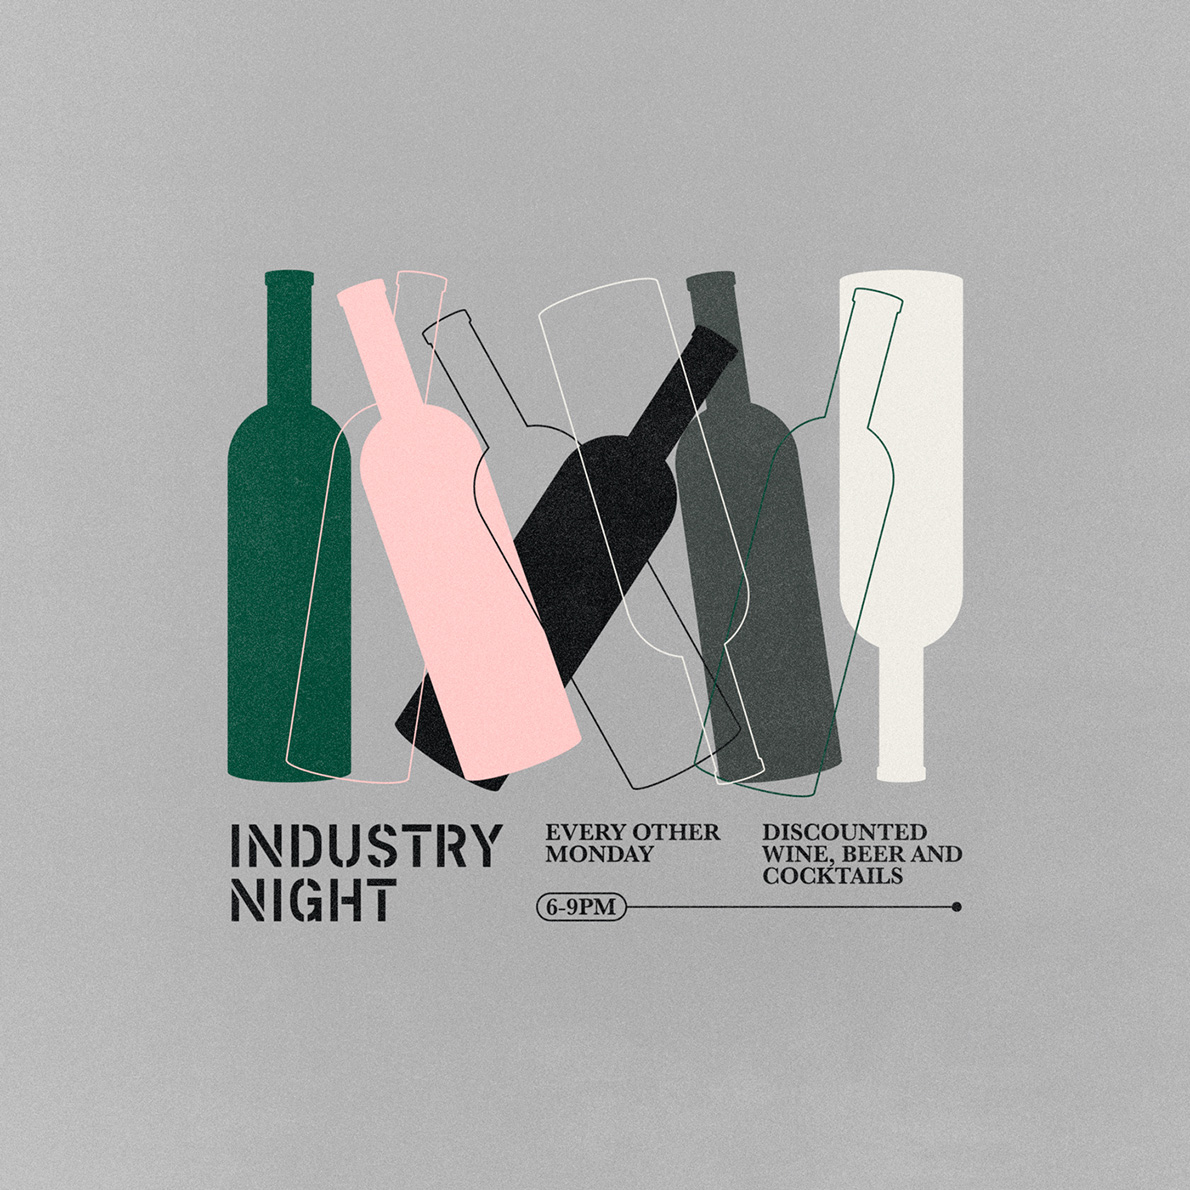 Industry Night and Open Rooftop every other Monday at the LINE DC